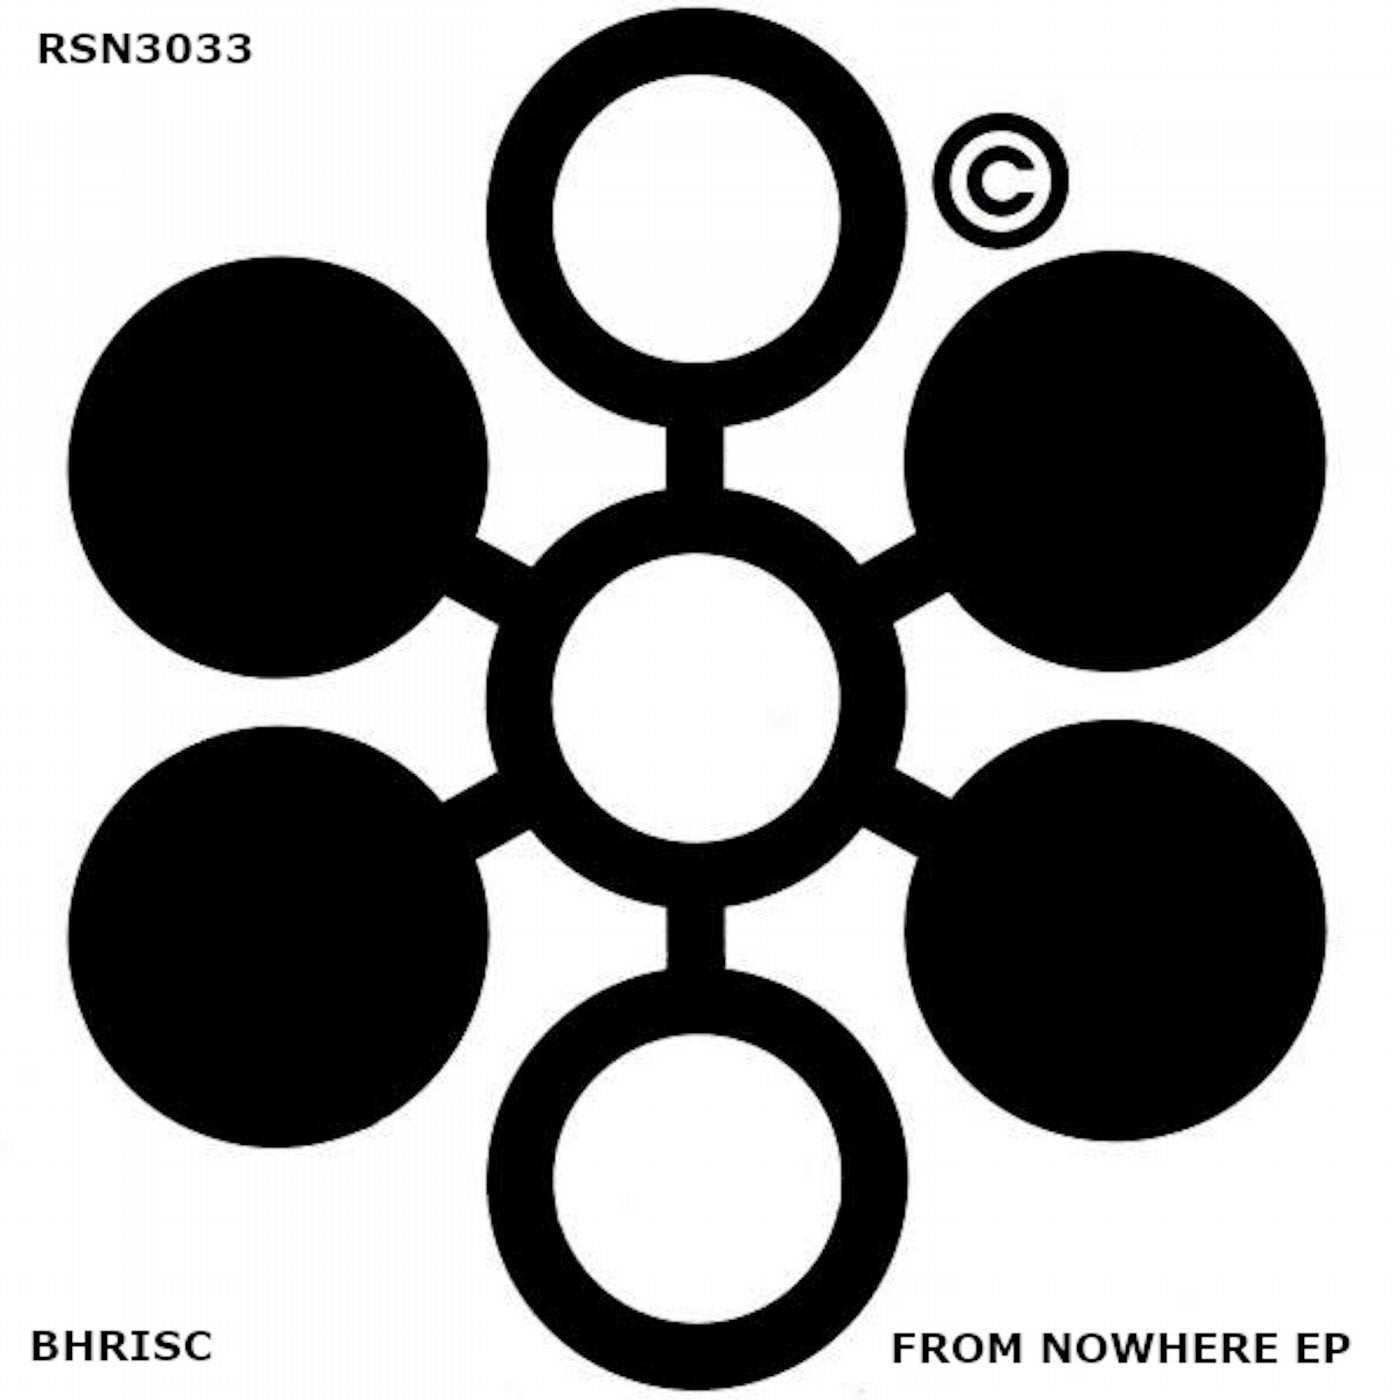 From Nowhere EP